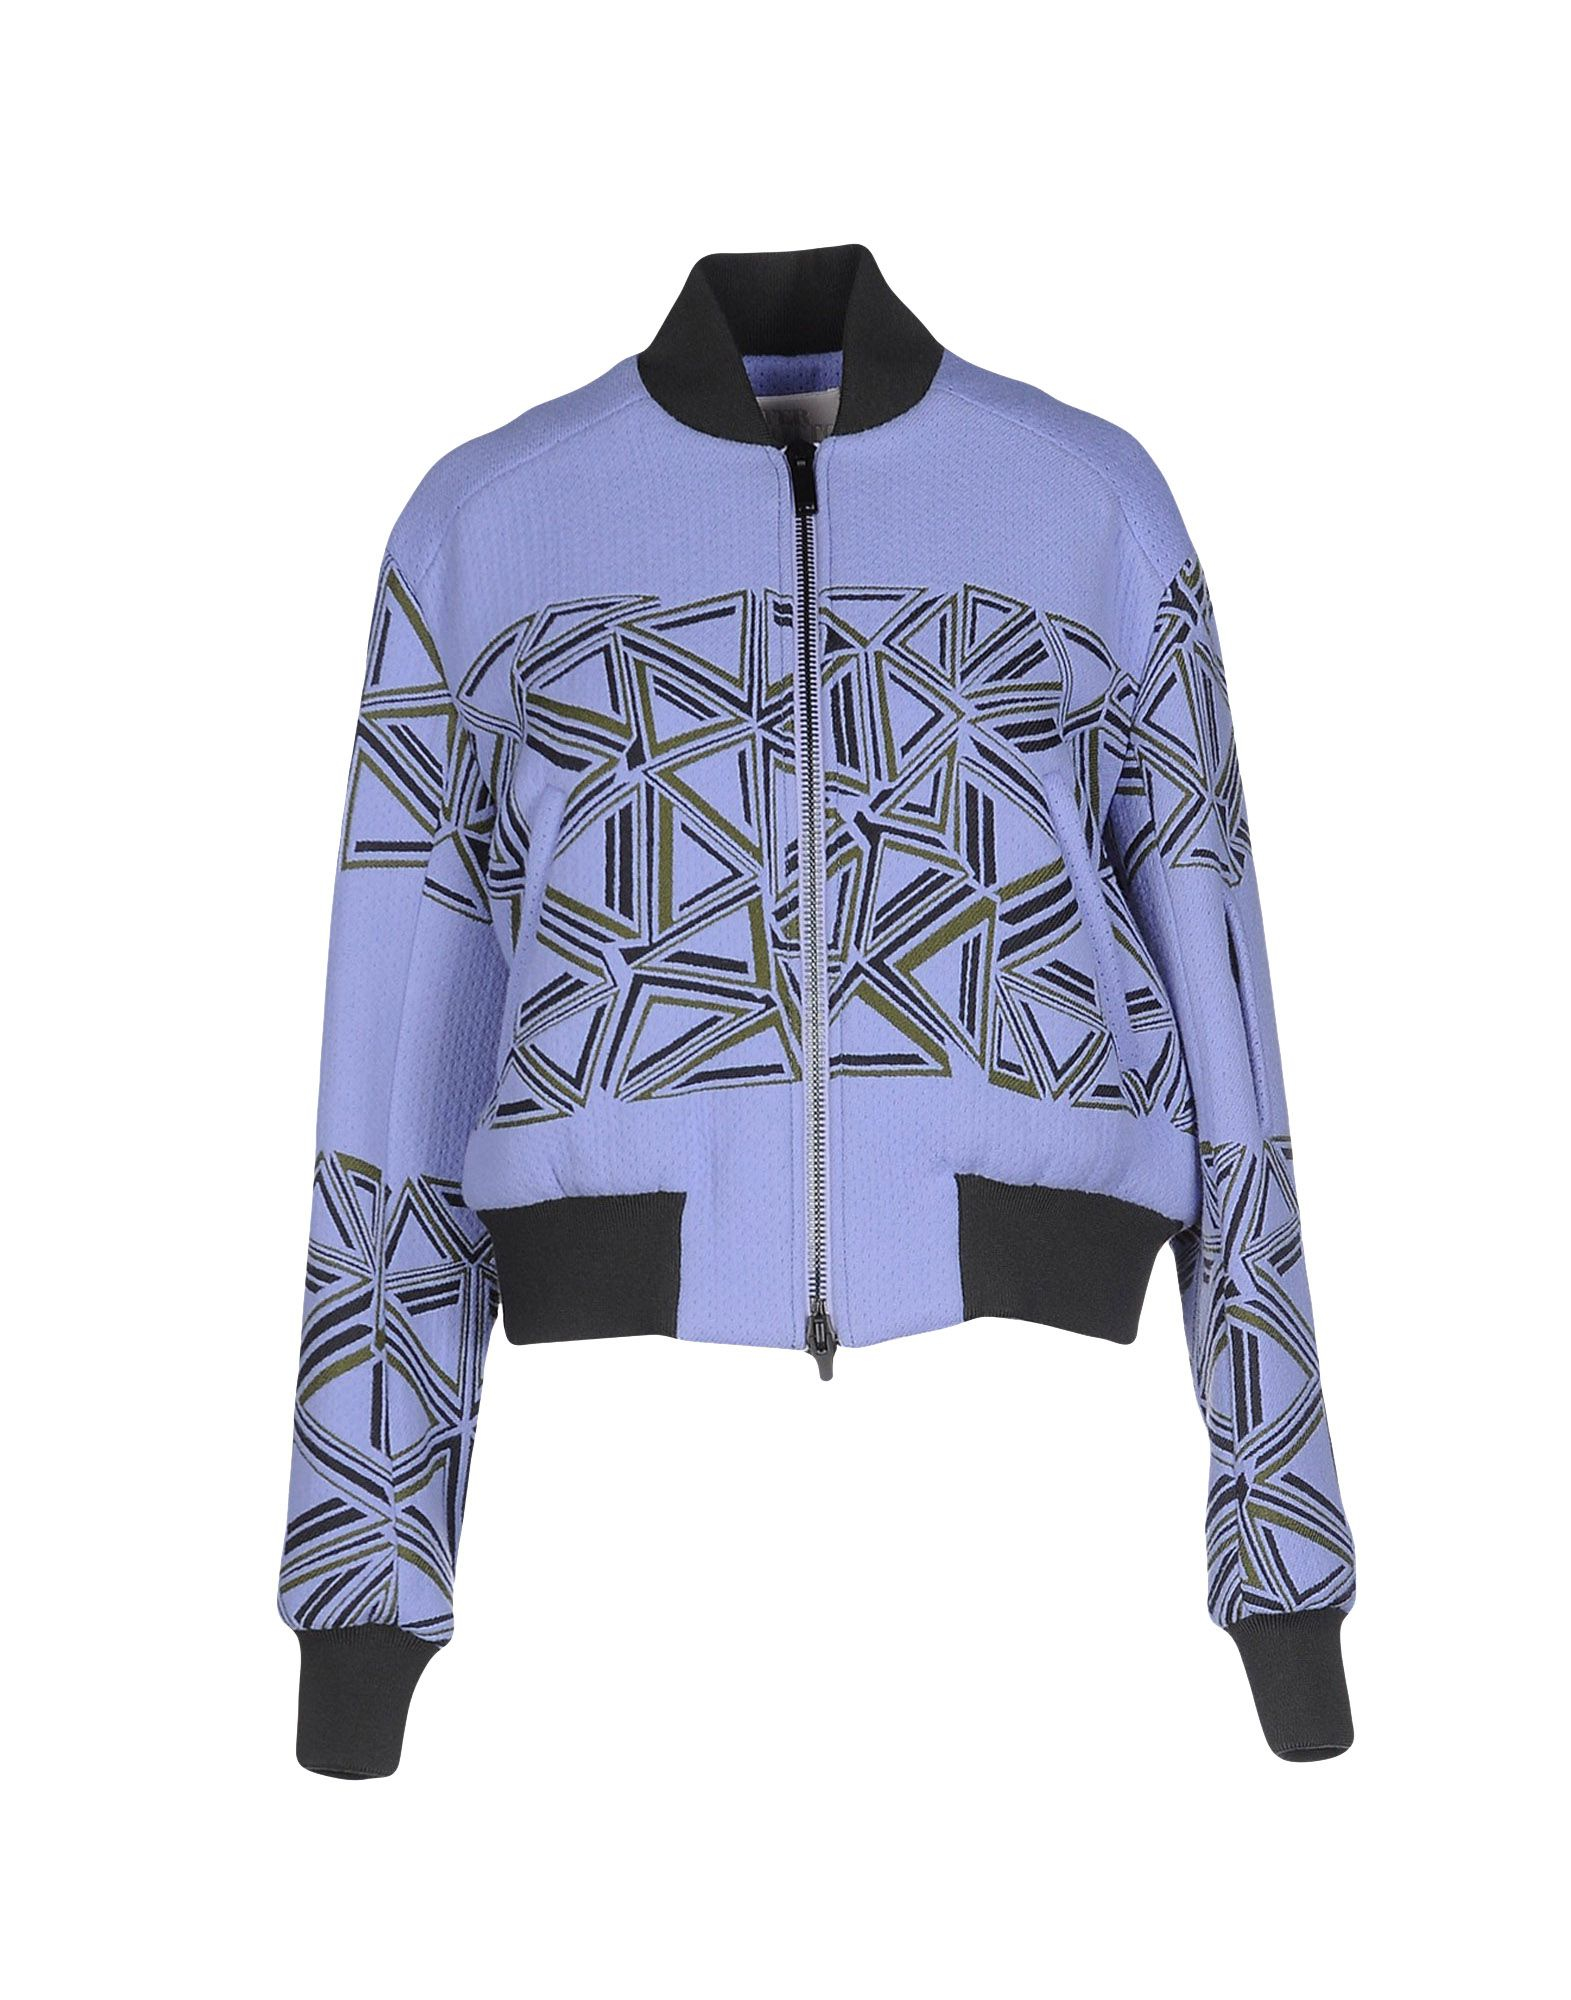 Peter pilotto Jacket in Blue | Lyst